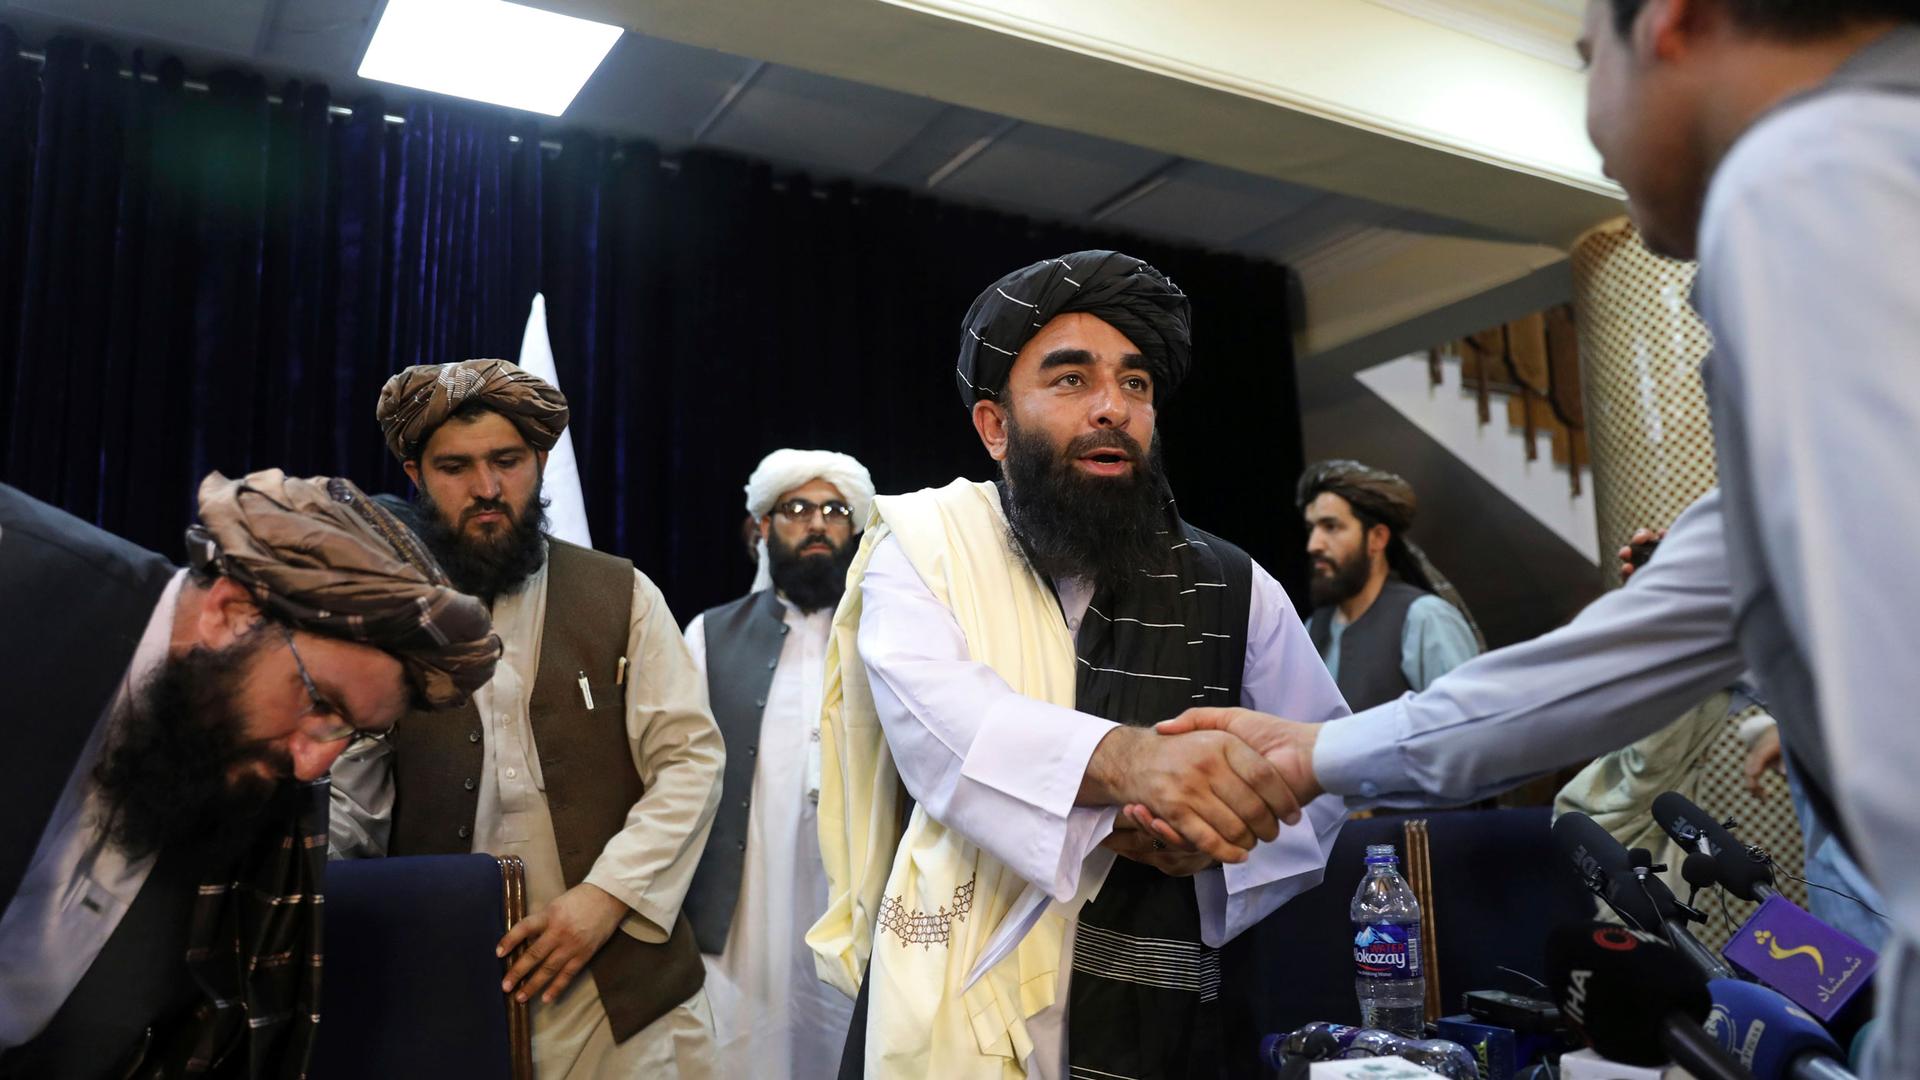 Taliban spokesman Zabihullah Mujahid shakes hand with a journalist after his first news conference, in Kabul, Afghanistan, Tuesday, Aug. 17, 2021. 